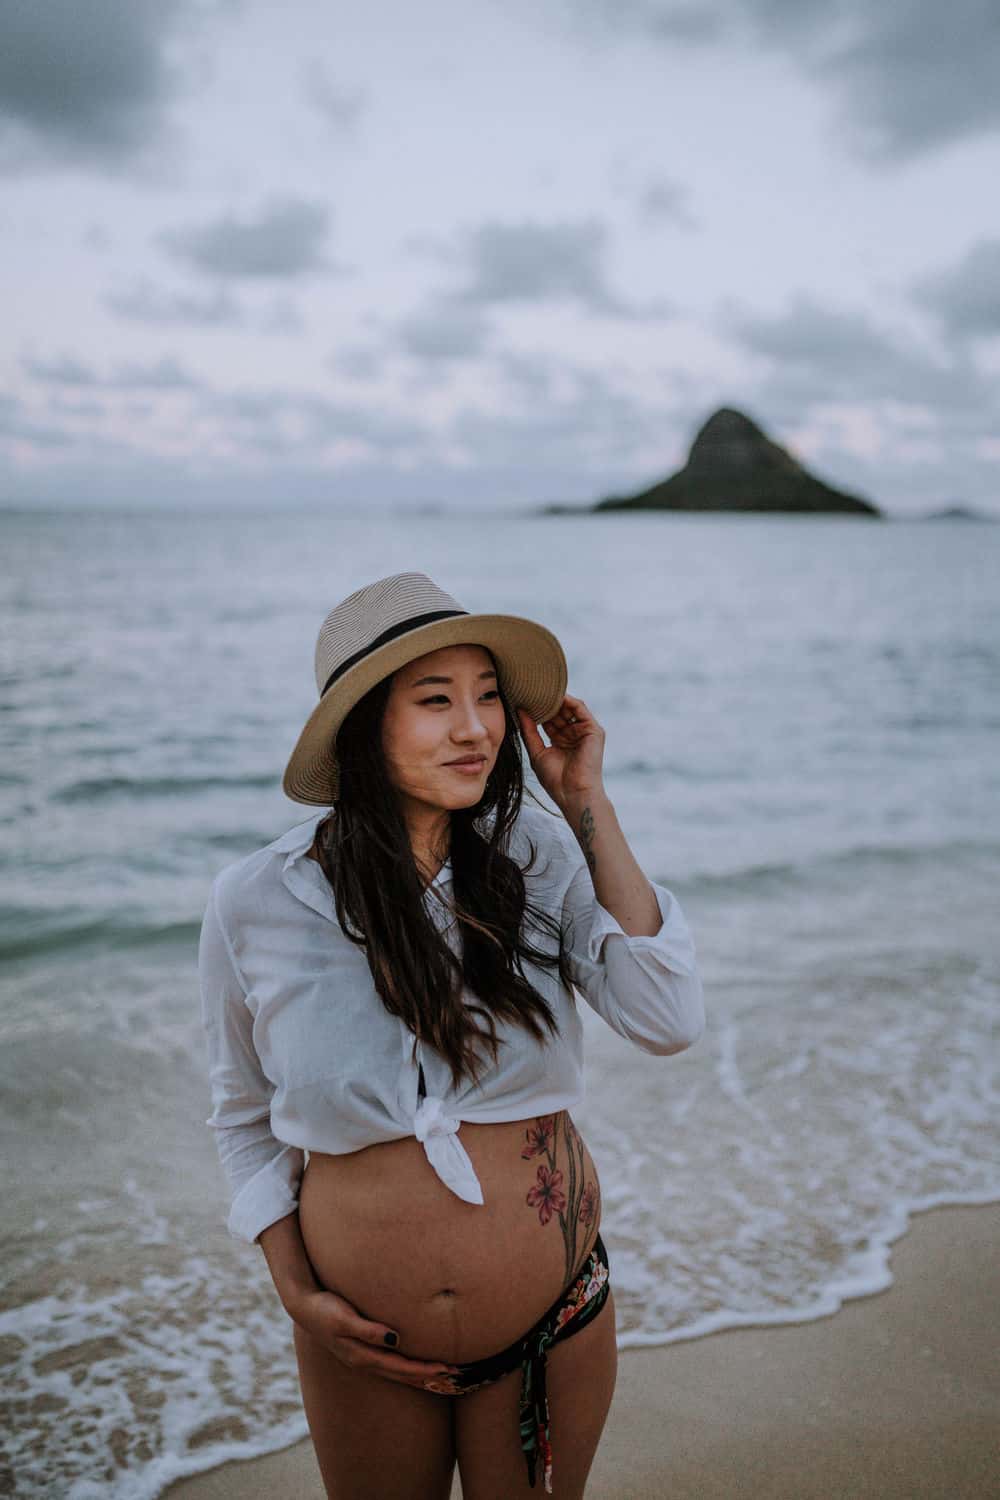 Outfit inspiration for maternity photos on the beach in Hawaii